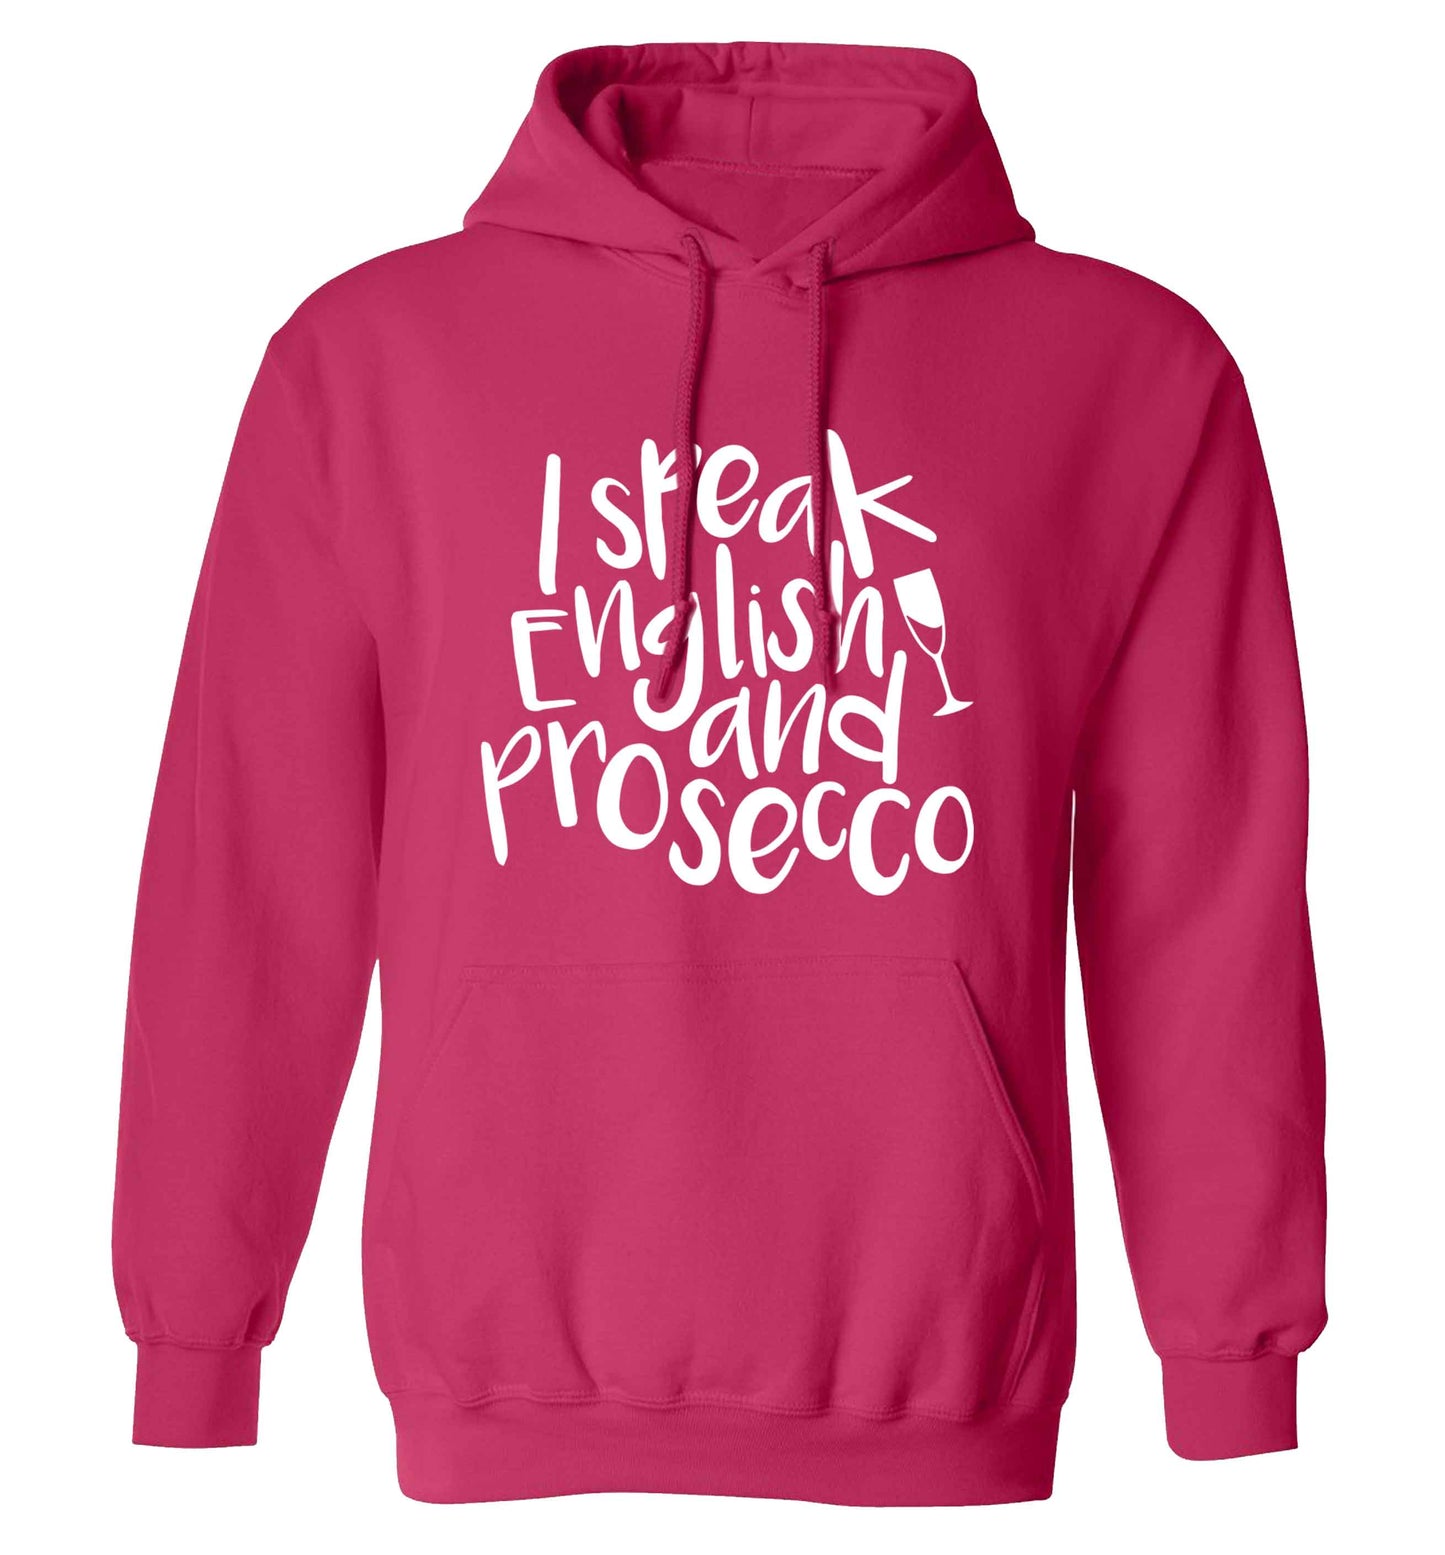 I speak English and prosecco adults unisex pink hoodie 2XL